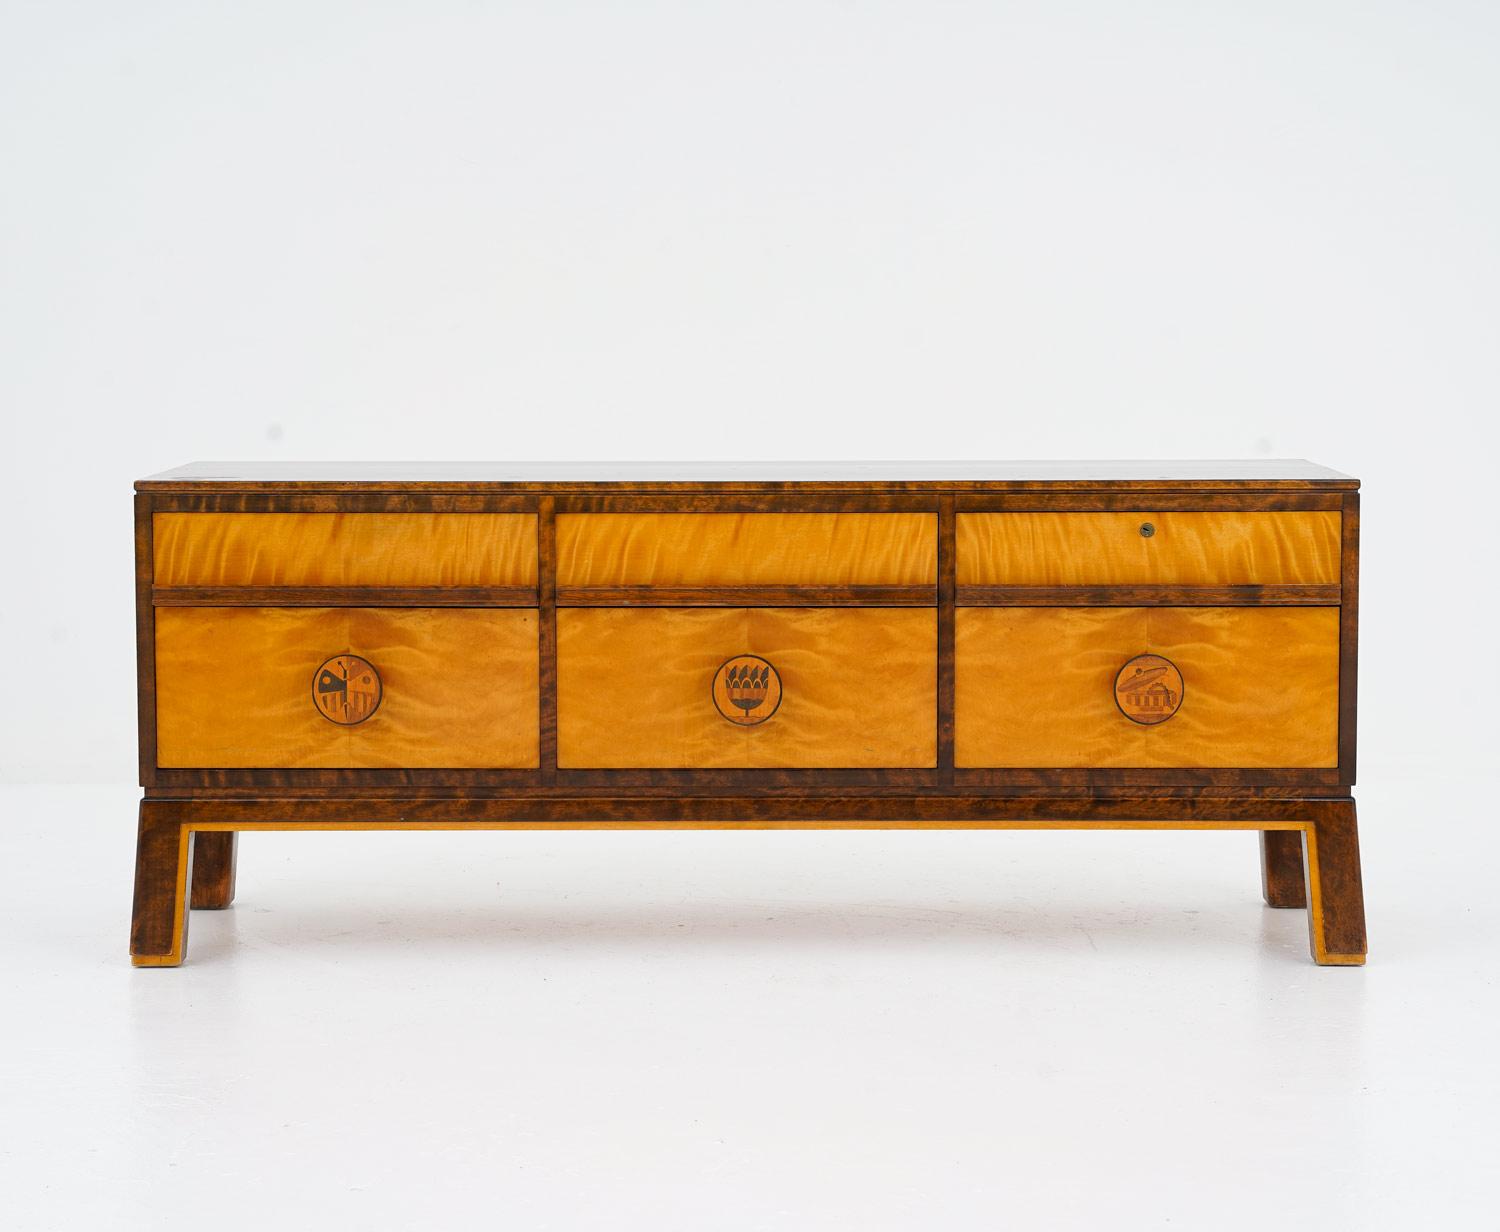 This sideboard by Otto Schulz for Boet is a magnificent piece of furniture that dates back to the 1930s. This stunning sideboard is made of high-quality birch wood, with intricate inlays of different woods on the handles, giving it a unique touch of